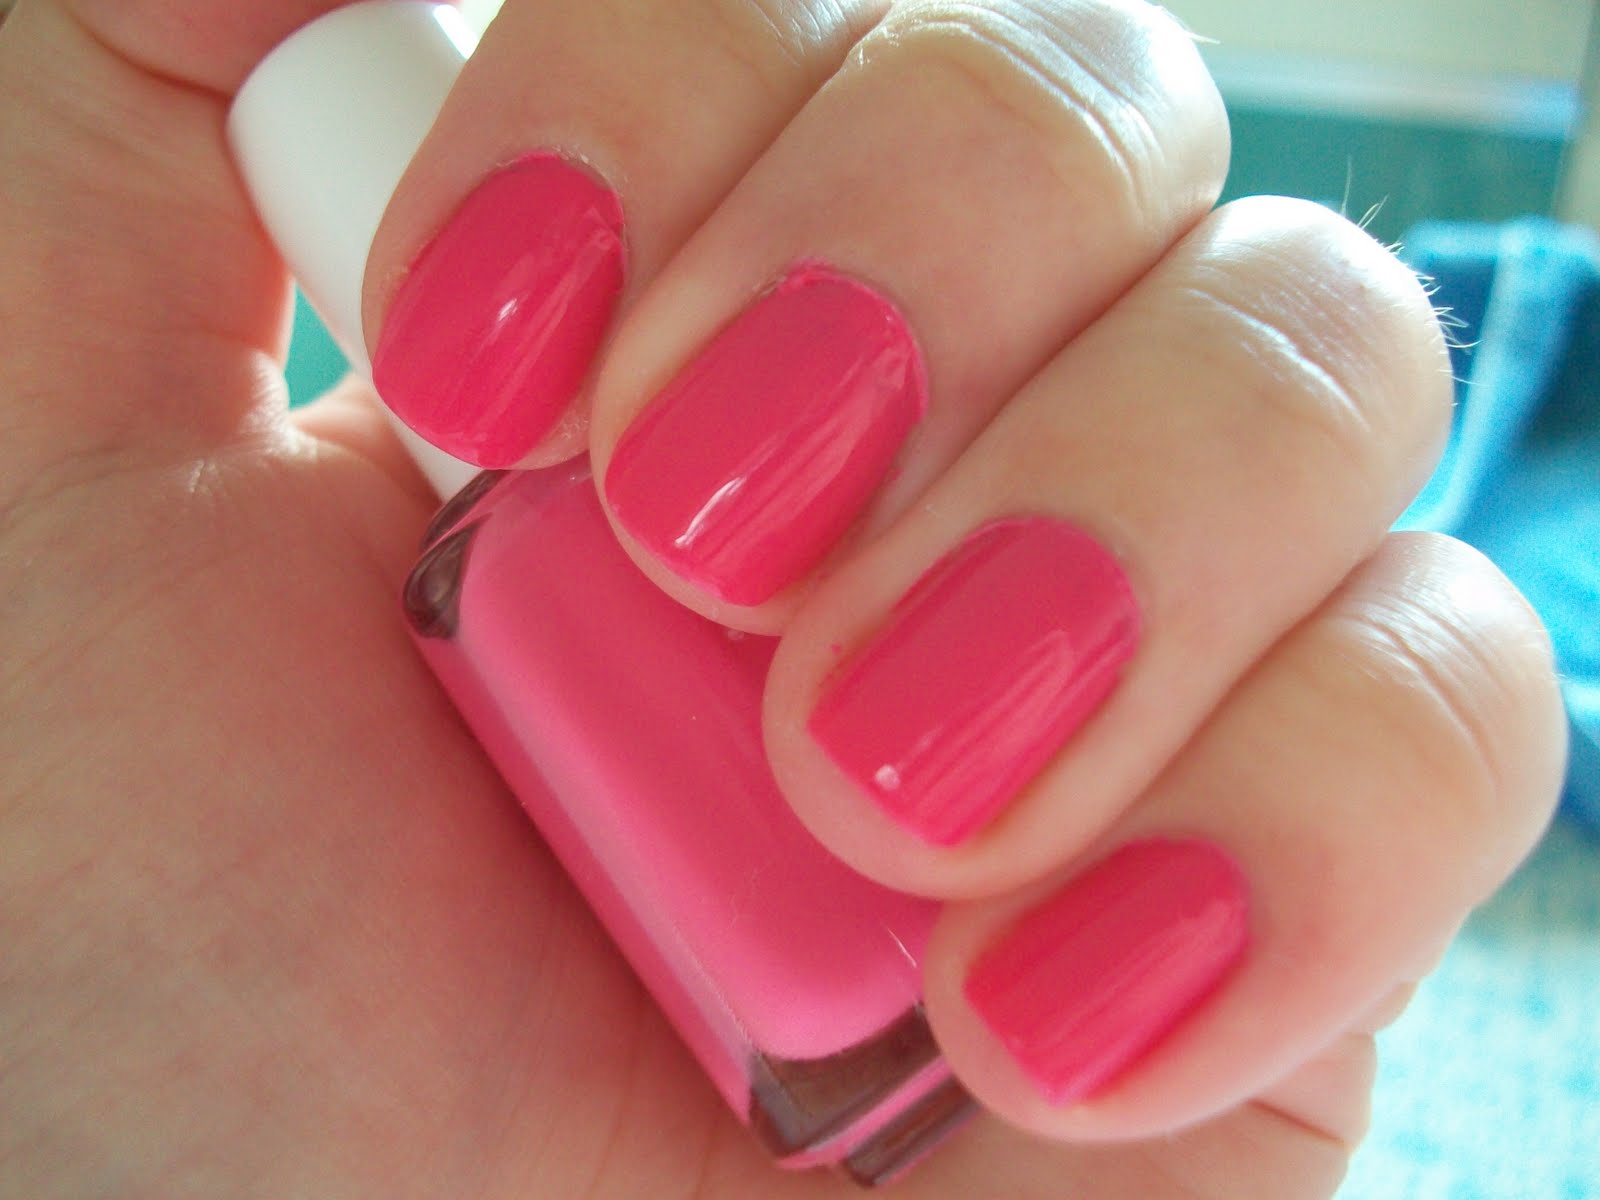 4. "Short Nail, Big Impact: Best Nail Polish Colors to Try" - wide 6